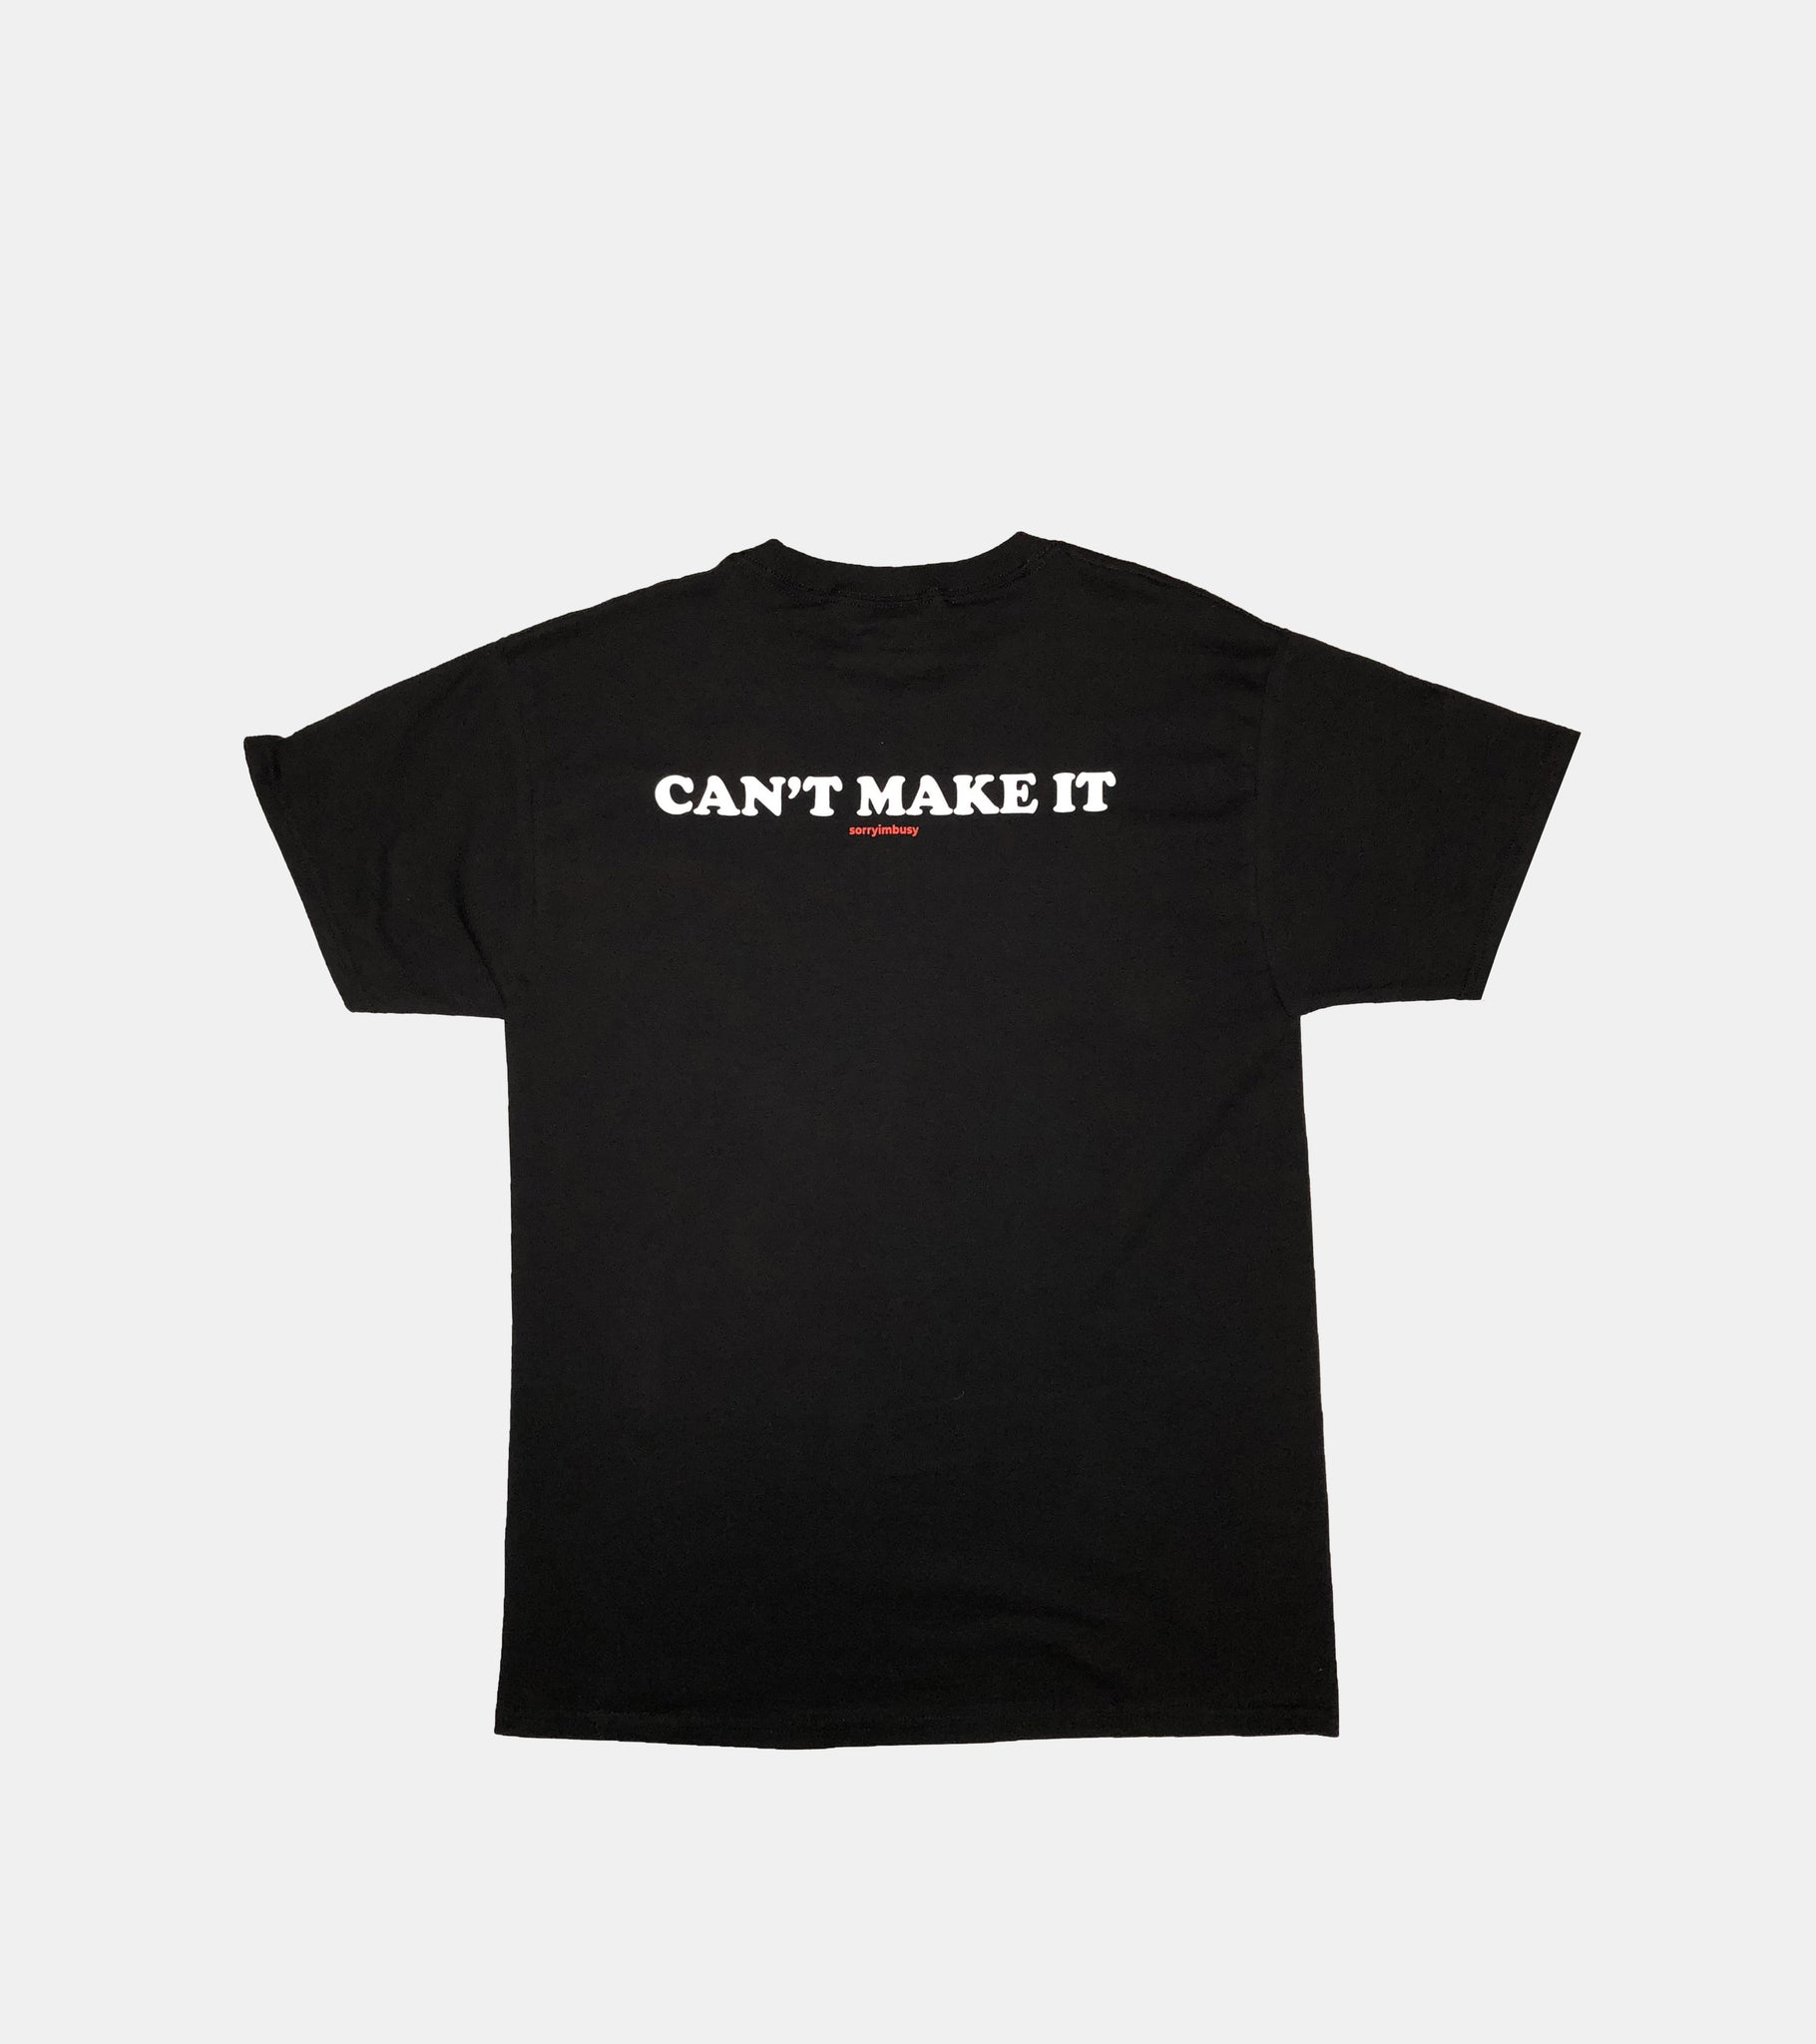 'CAN'T MAKE IT' T-Shirt - SORRYIMBUSY